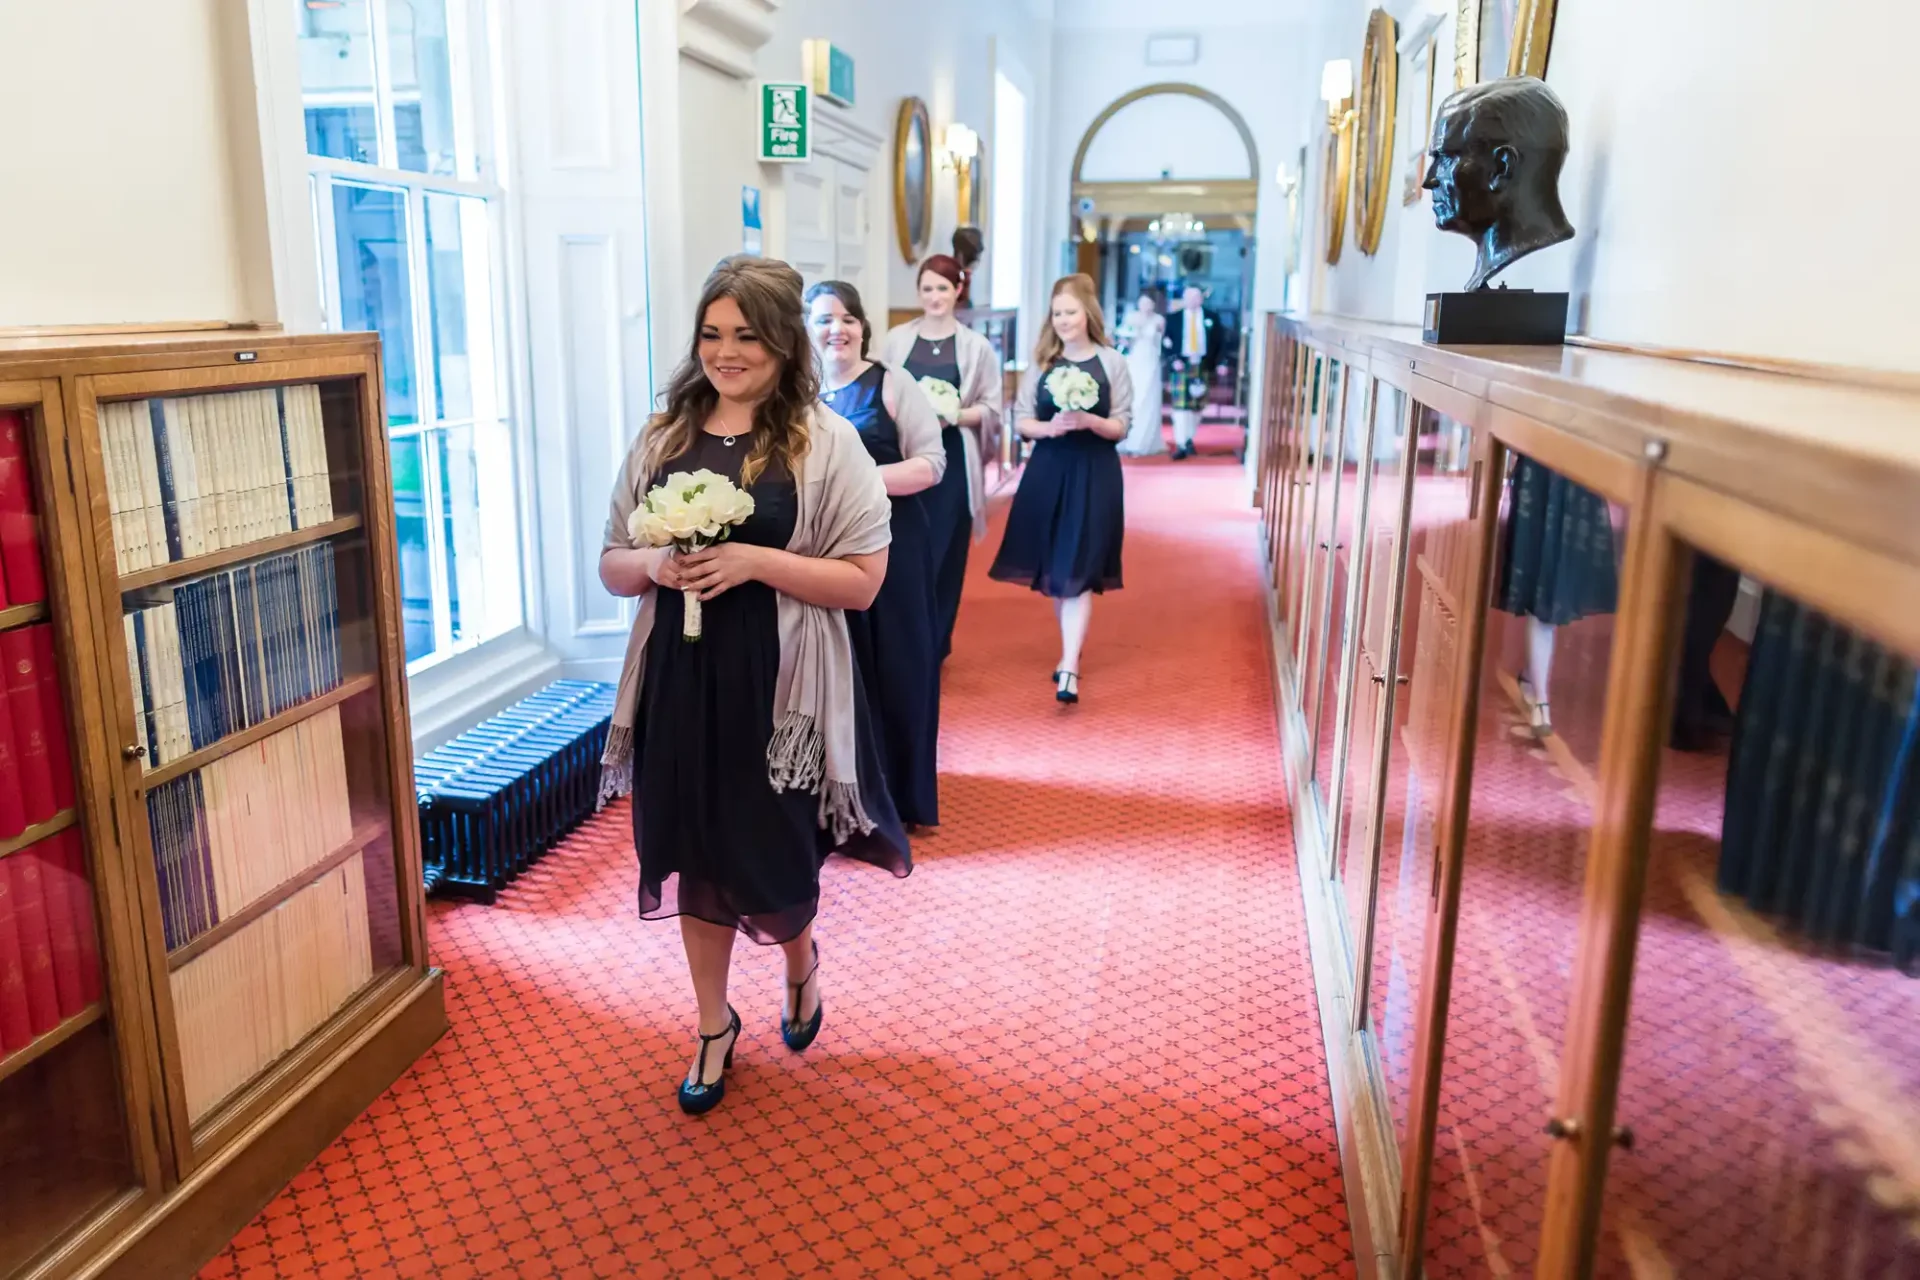 A woman leading a group of bridesmaids along a library hallway, all holding bouquets and dressed in formal attire.